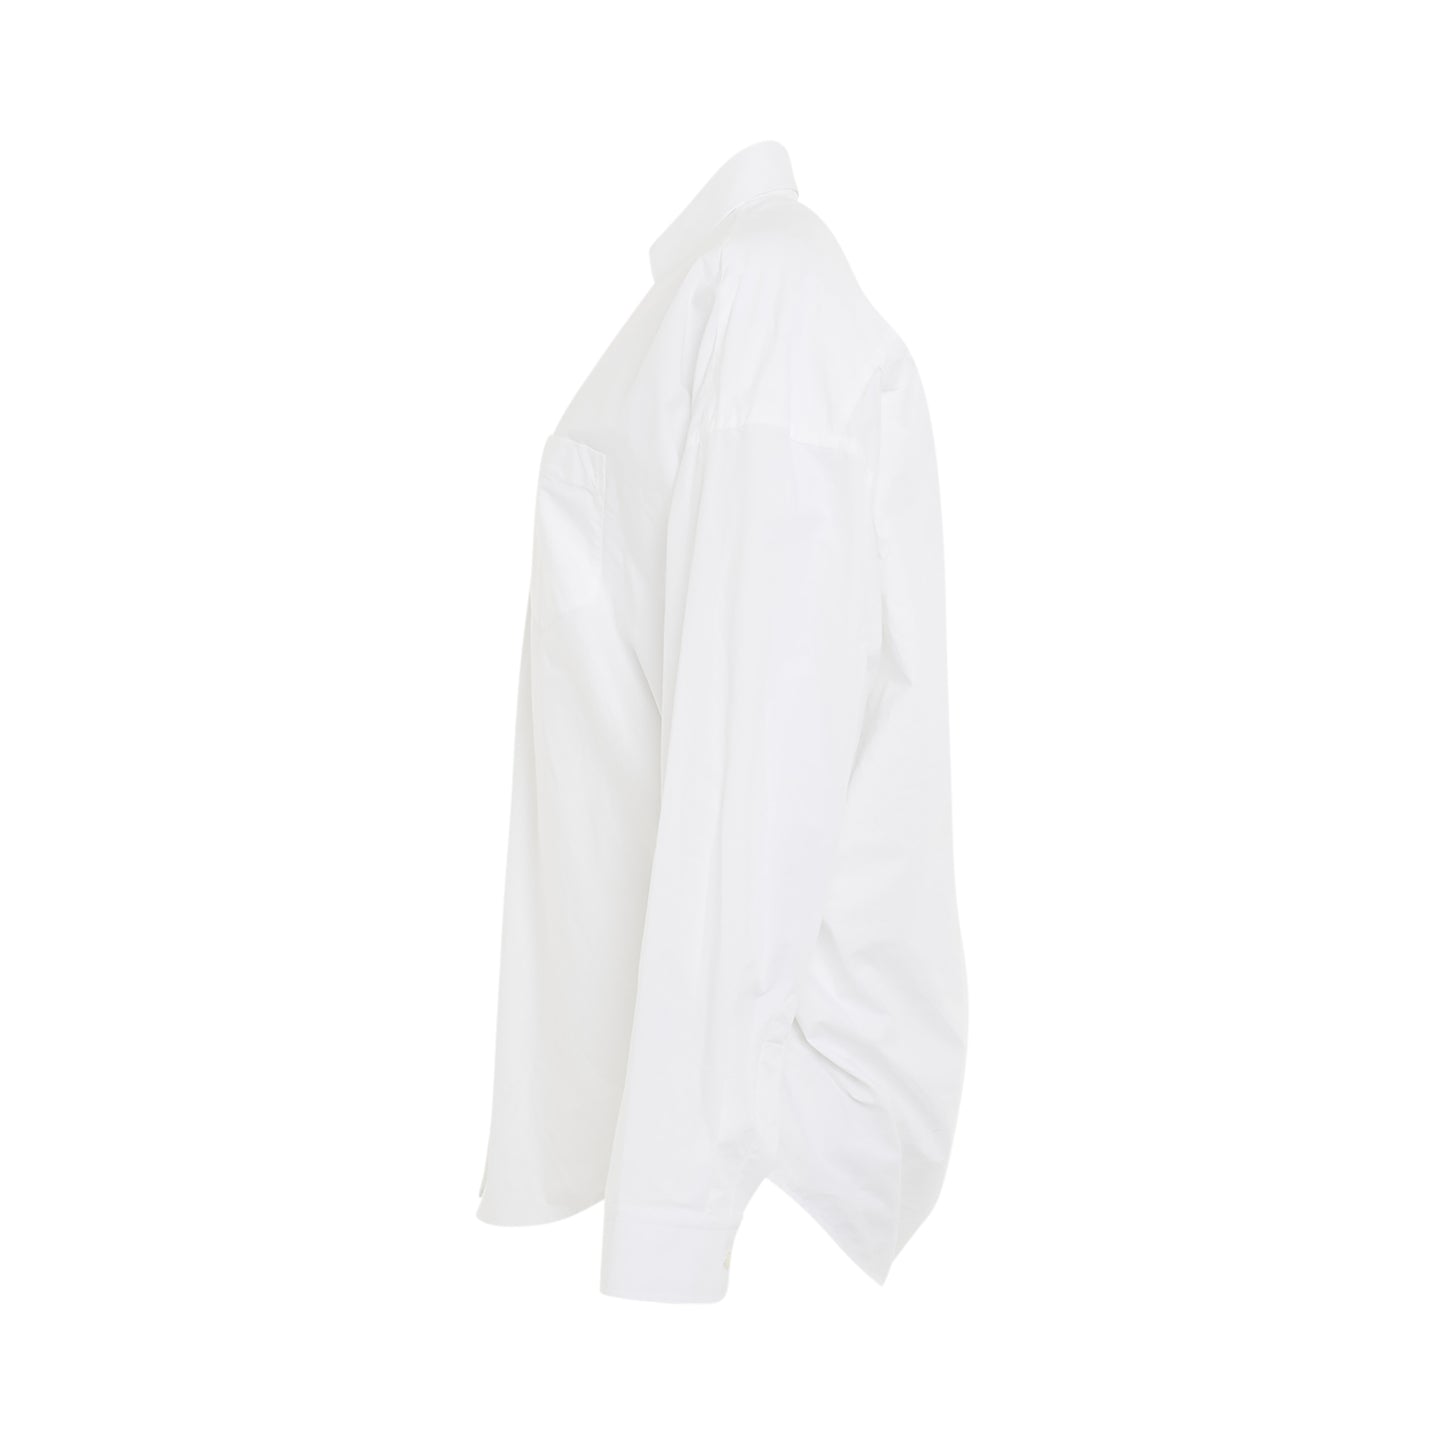 Cocoon Shirt in White